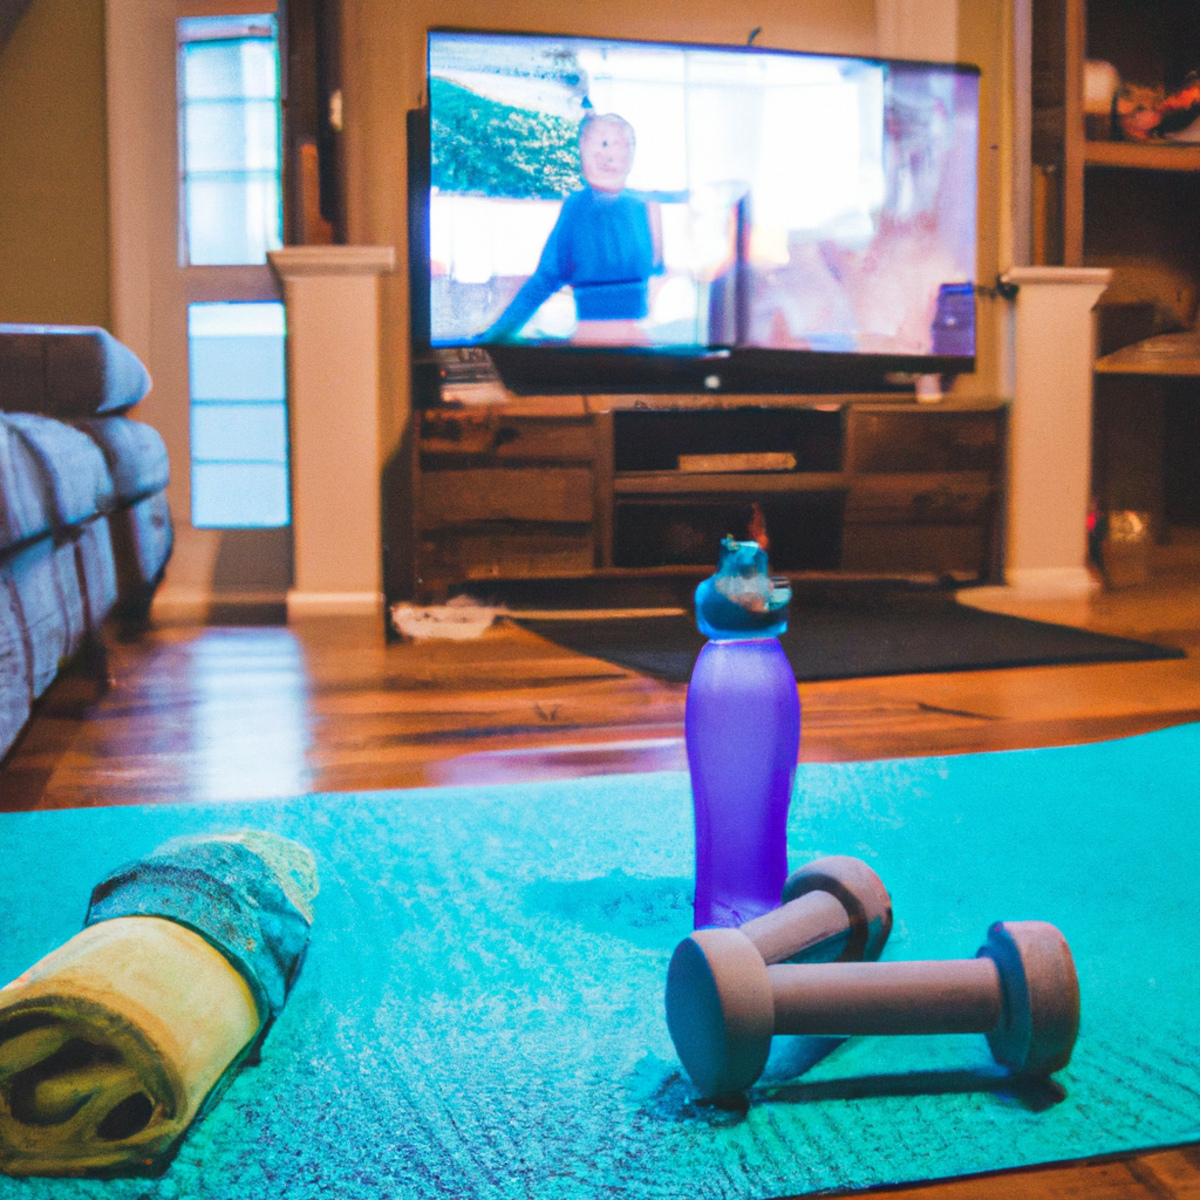 The photo depicts a cozy living room with a large yoga mat spread out on the floor. In the center of the mat, there is a set of dumbbells and a resistance band, ready for use. A water bottle and towel sit nearby, indicating that the person is in the middle of a workout. In the background, a television screen displays a fitness video, providing guidance and motivation. The room is filled with natural light, creating a peaceful and inviting atmosphere for a productive at-home workout.